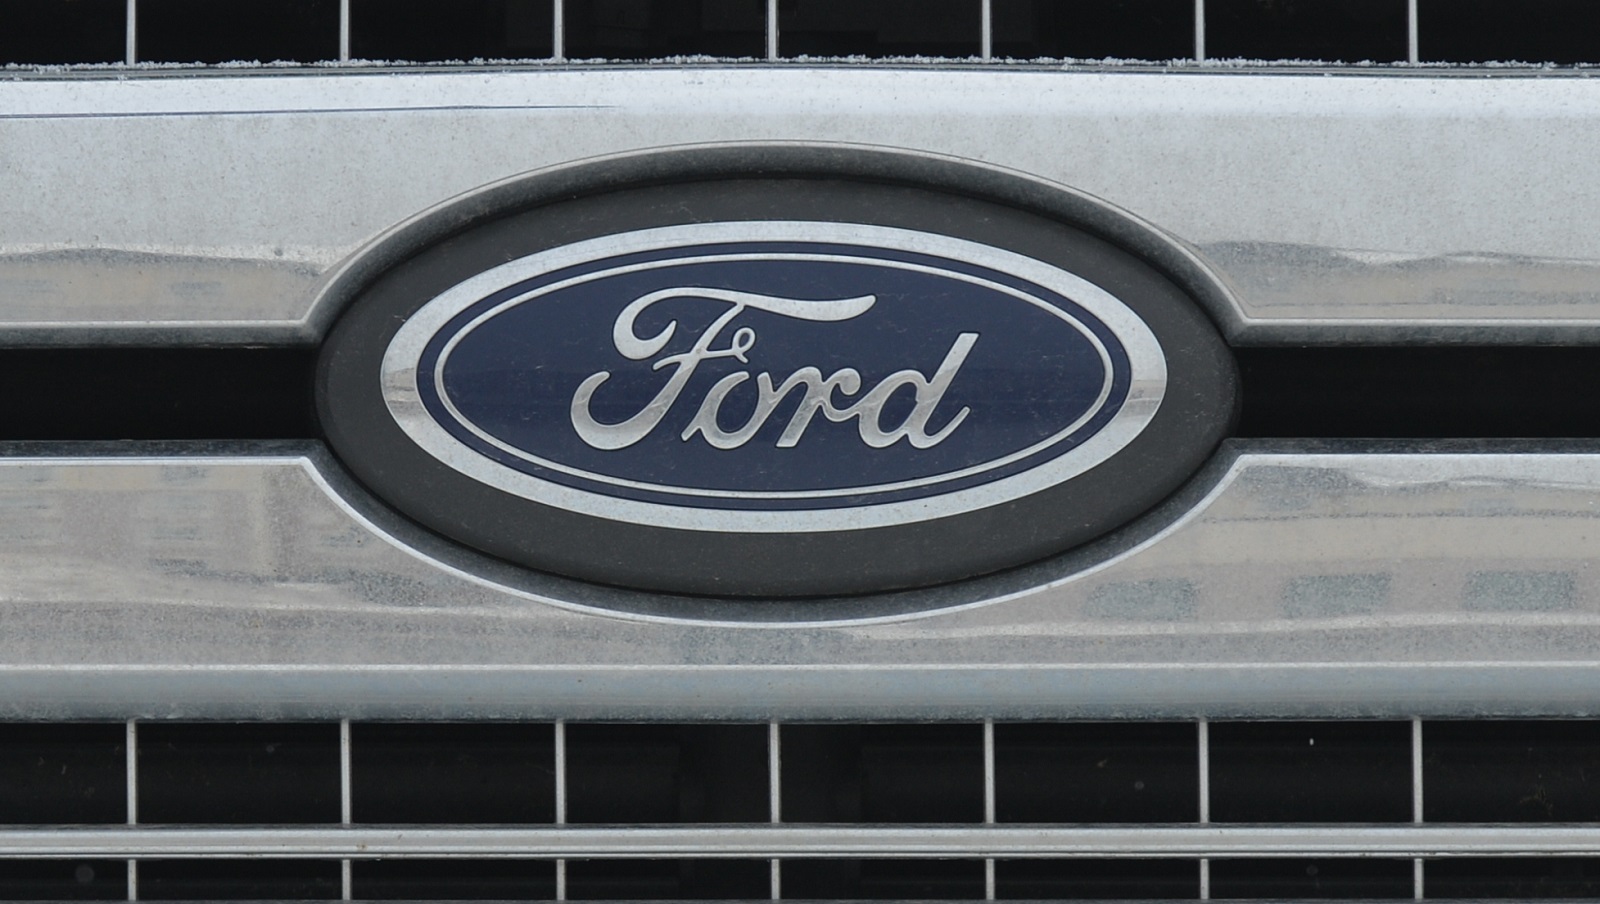 Ford logo seen on Ford vehicle outside a dealership in in Edmonton, Alberta, Canada.